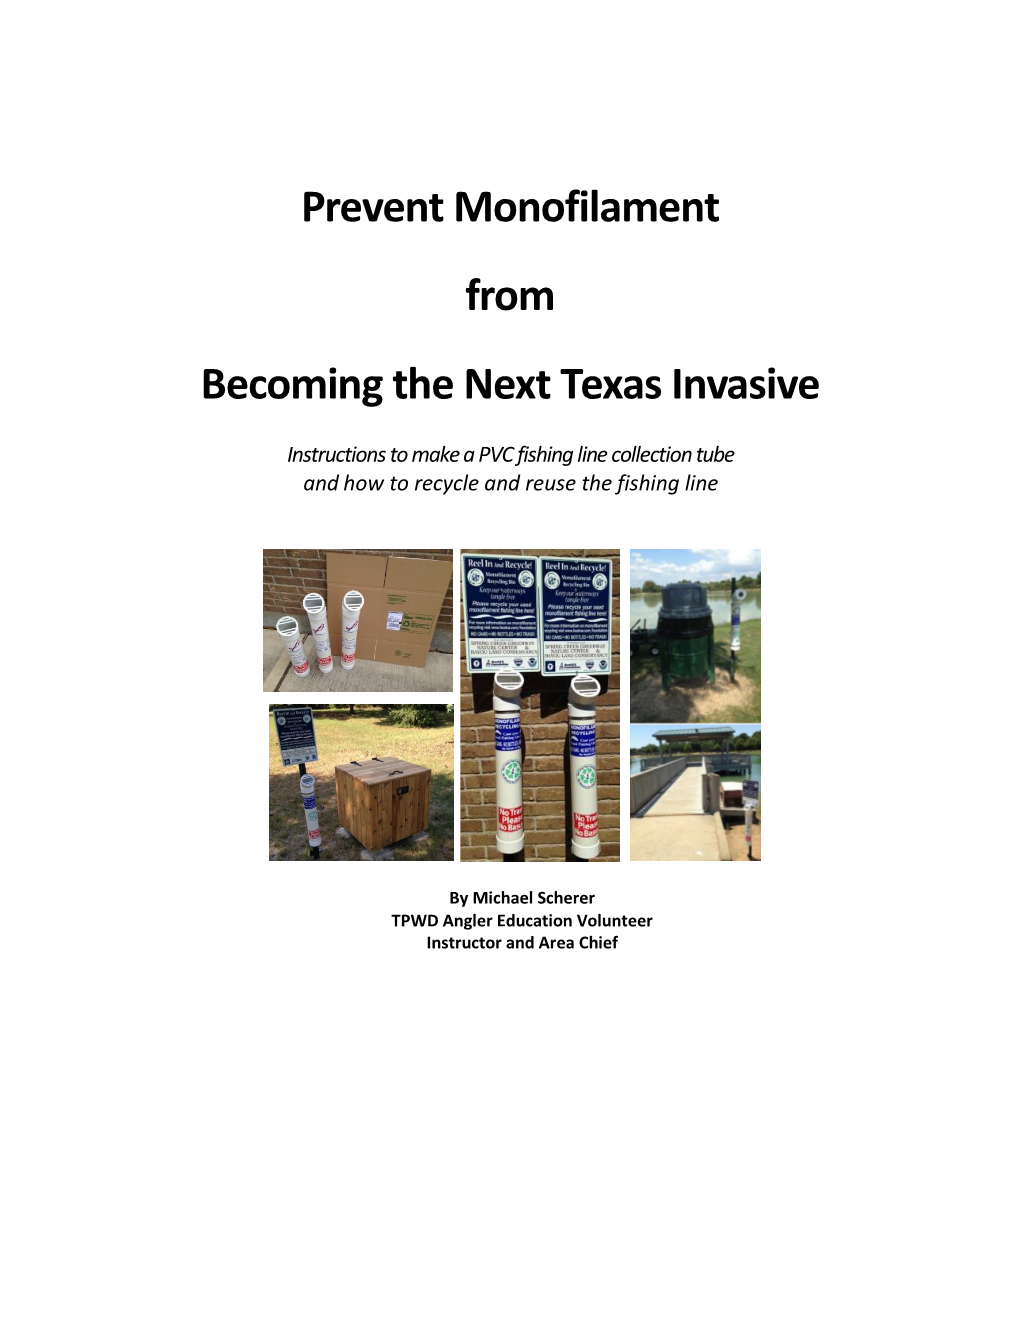 Prevent Monofilament from Becoming the Next Texas Invasive